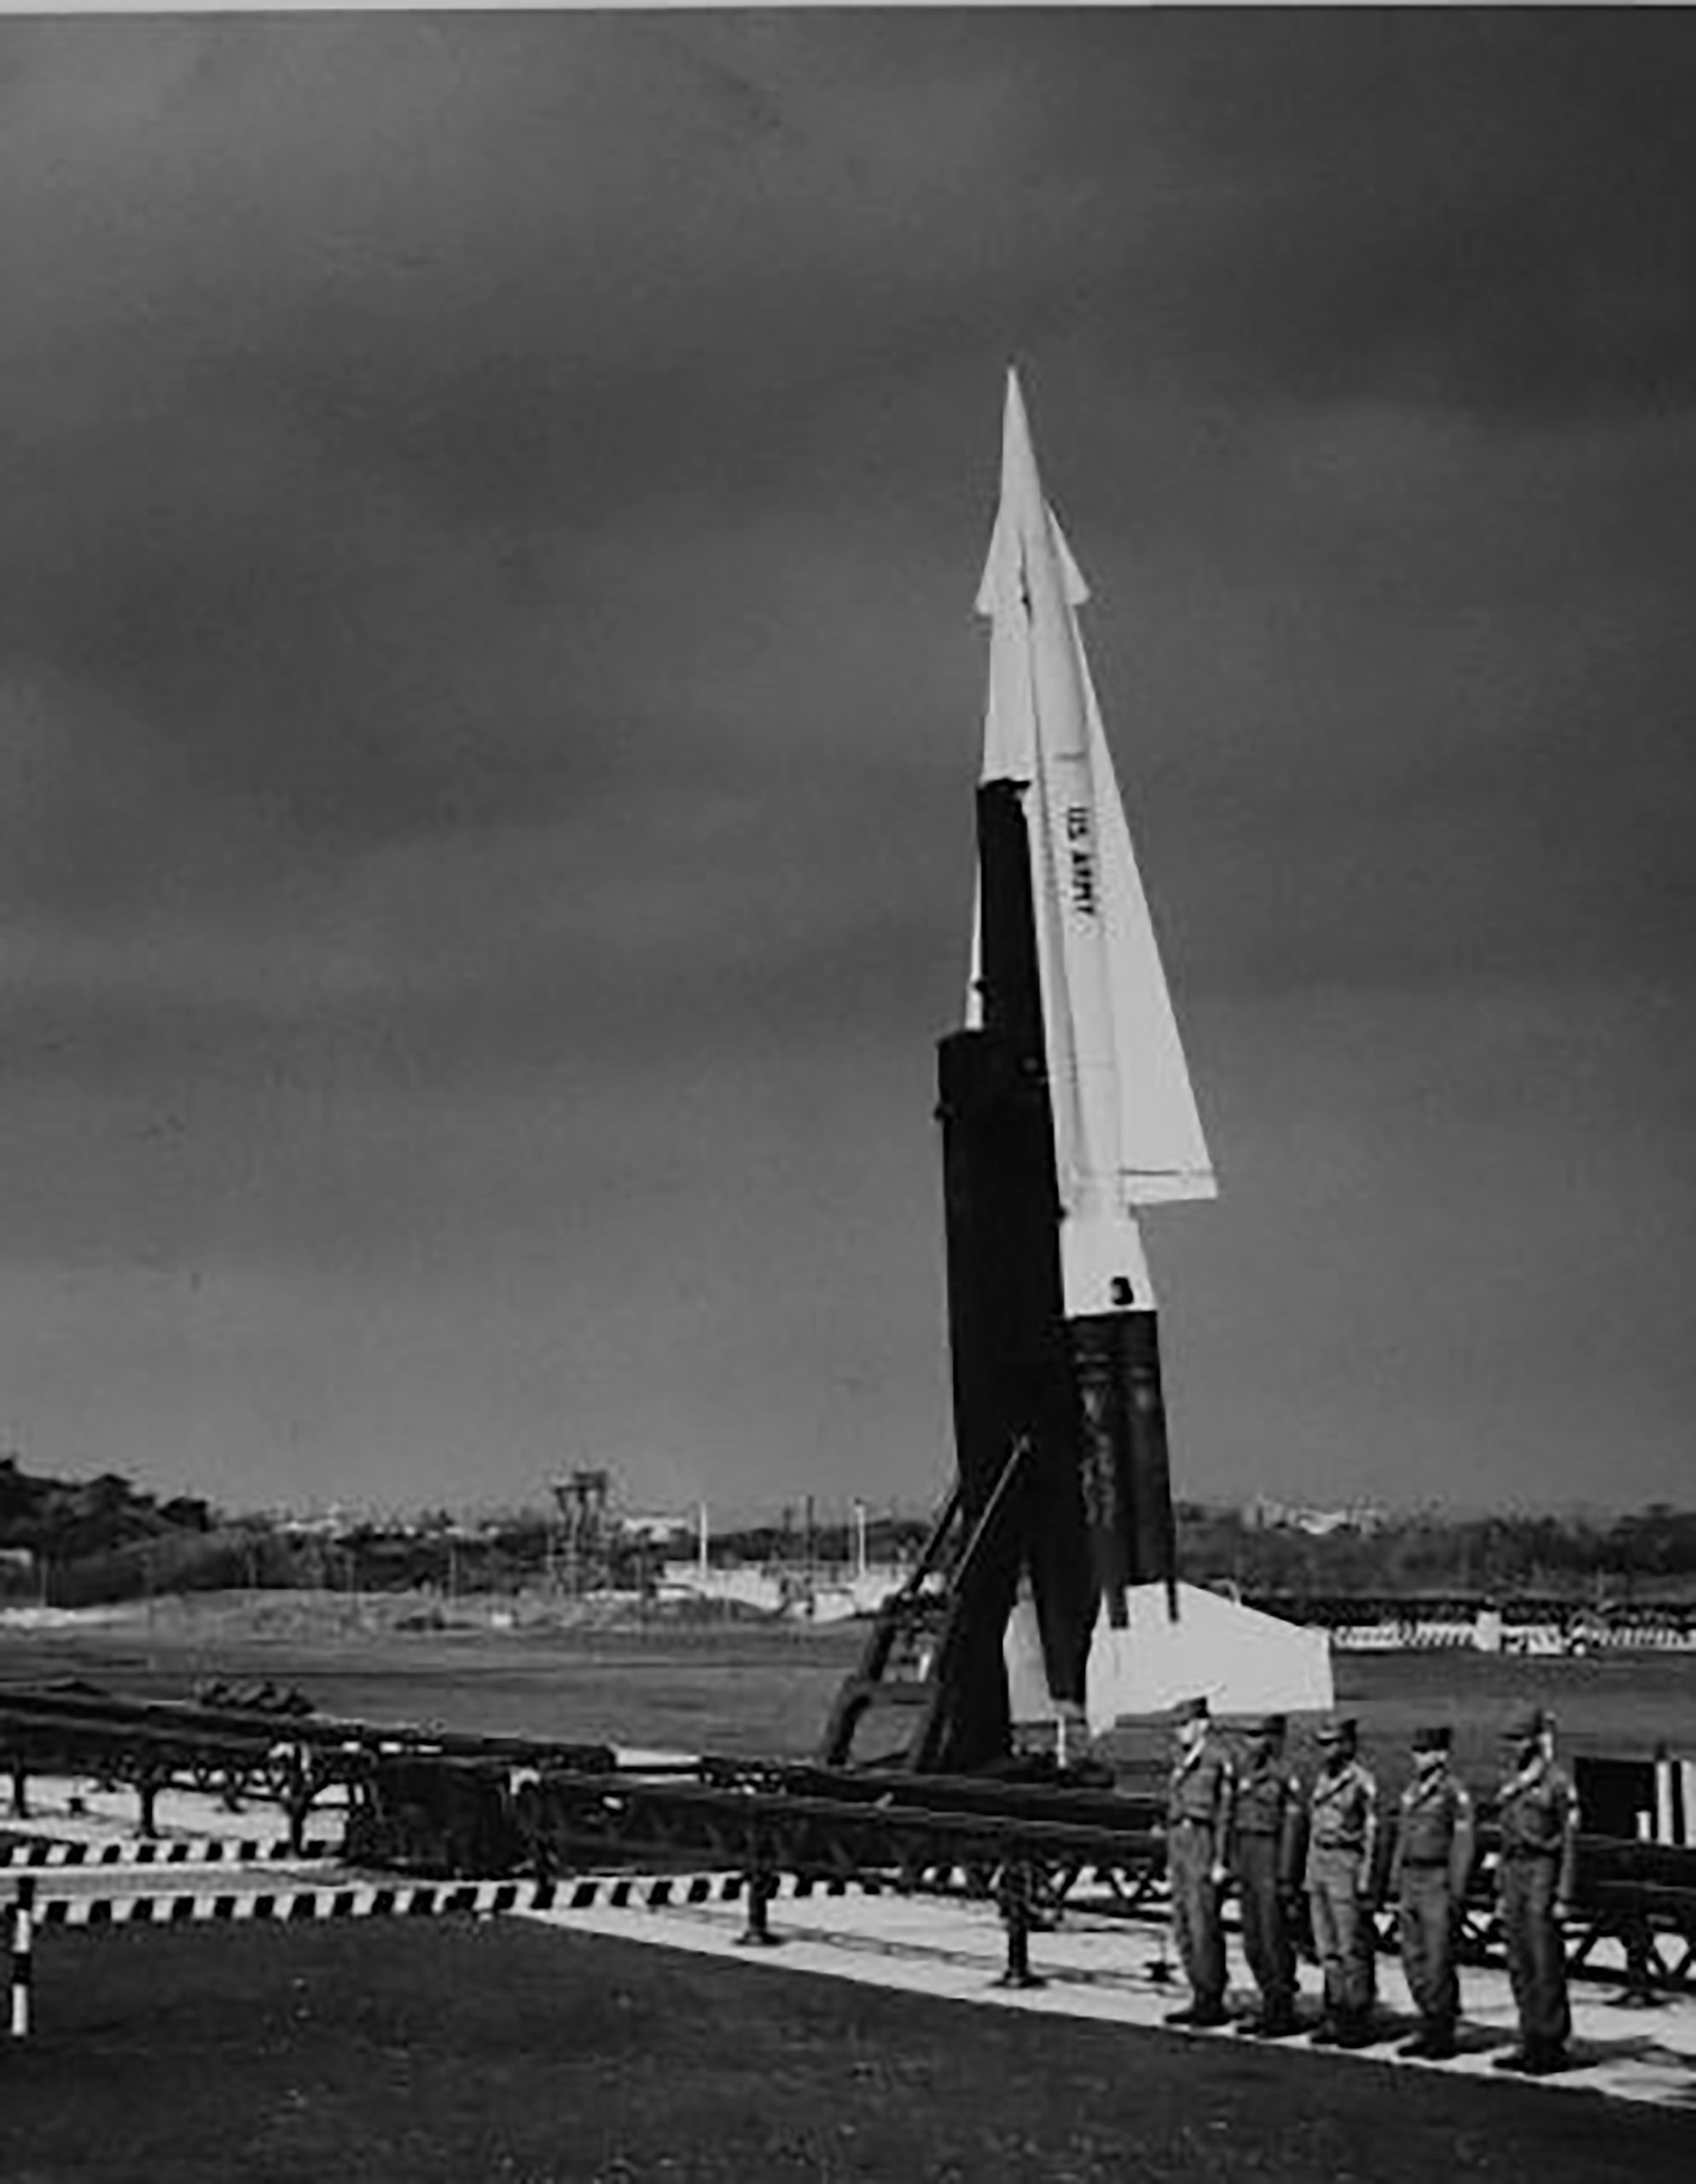 Nuclear tip missile. This image is from Fort Totten but missiles were fielded in Westhampton and Shoreham.